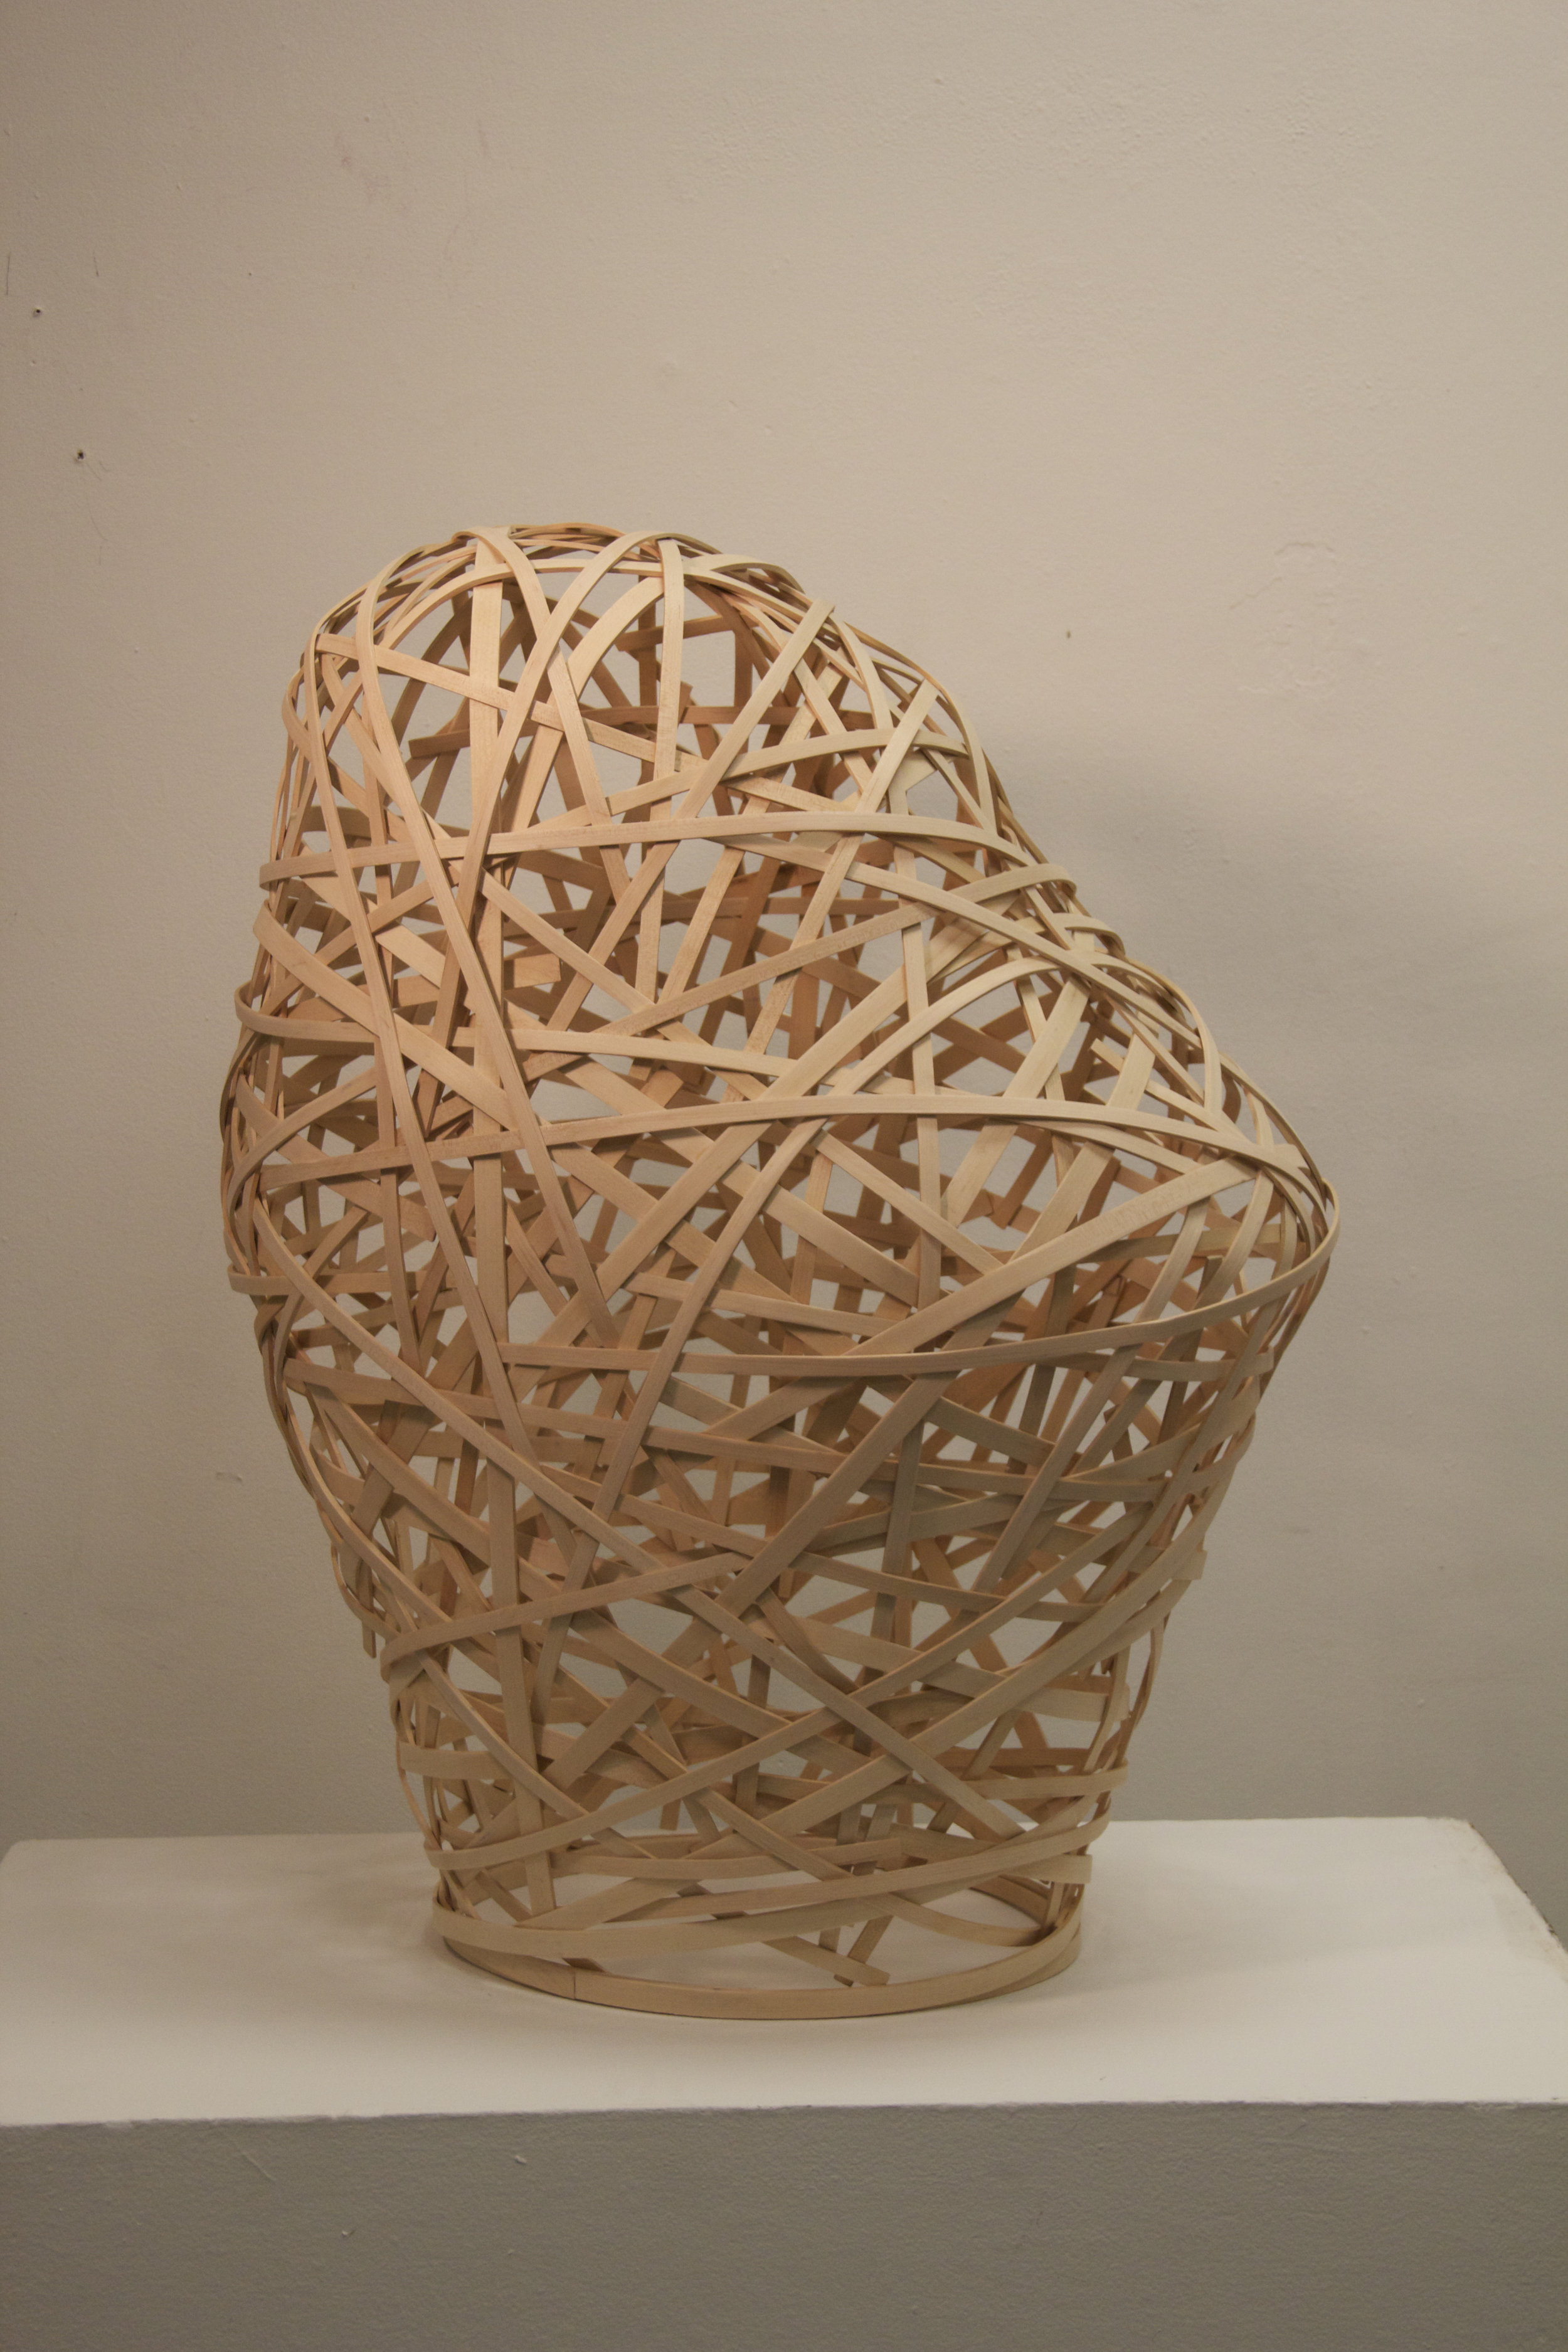  Towers Project  Sculptural Processes&nbsp;  27” x 38” x 18”  pine  2012 